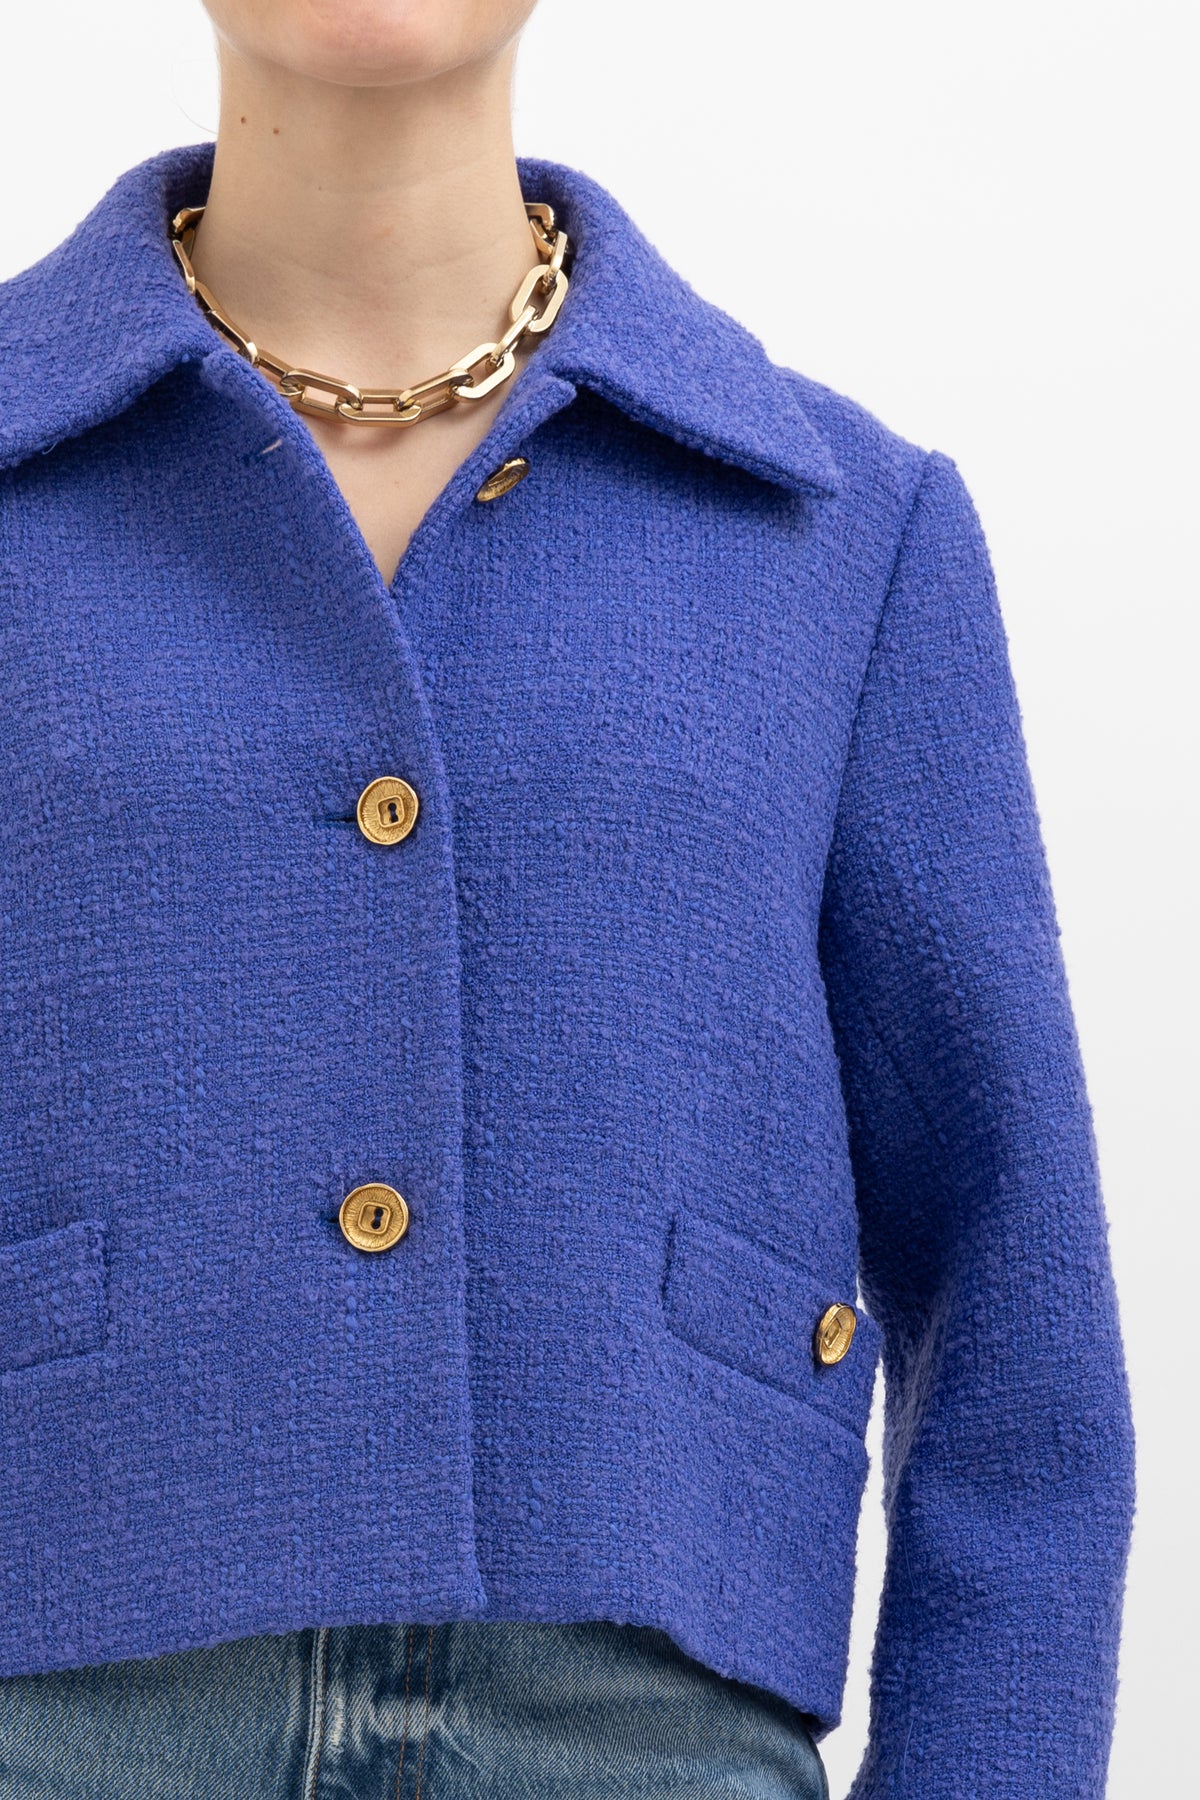 scanlan-theodore-violet-boucle-jacket-with-gold-buttons-10-6232